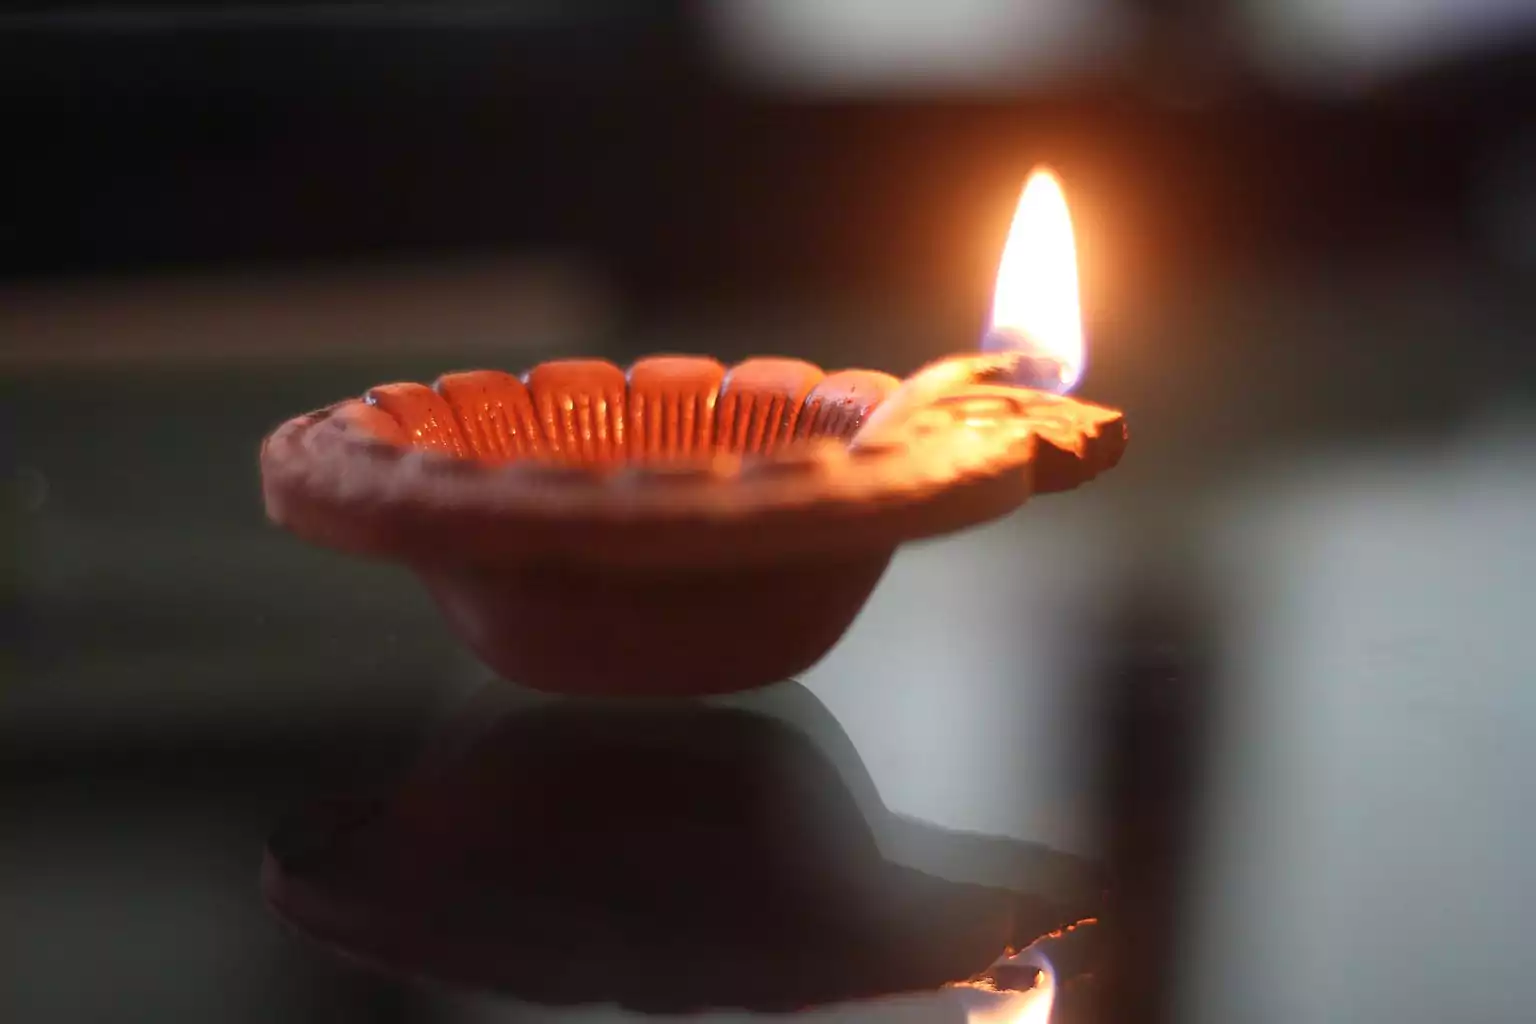 How to avoid last-minute overheads during Diwali?